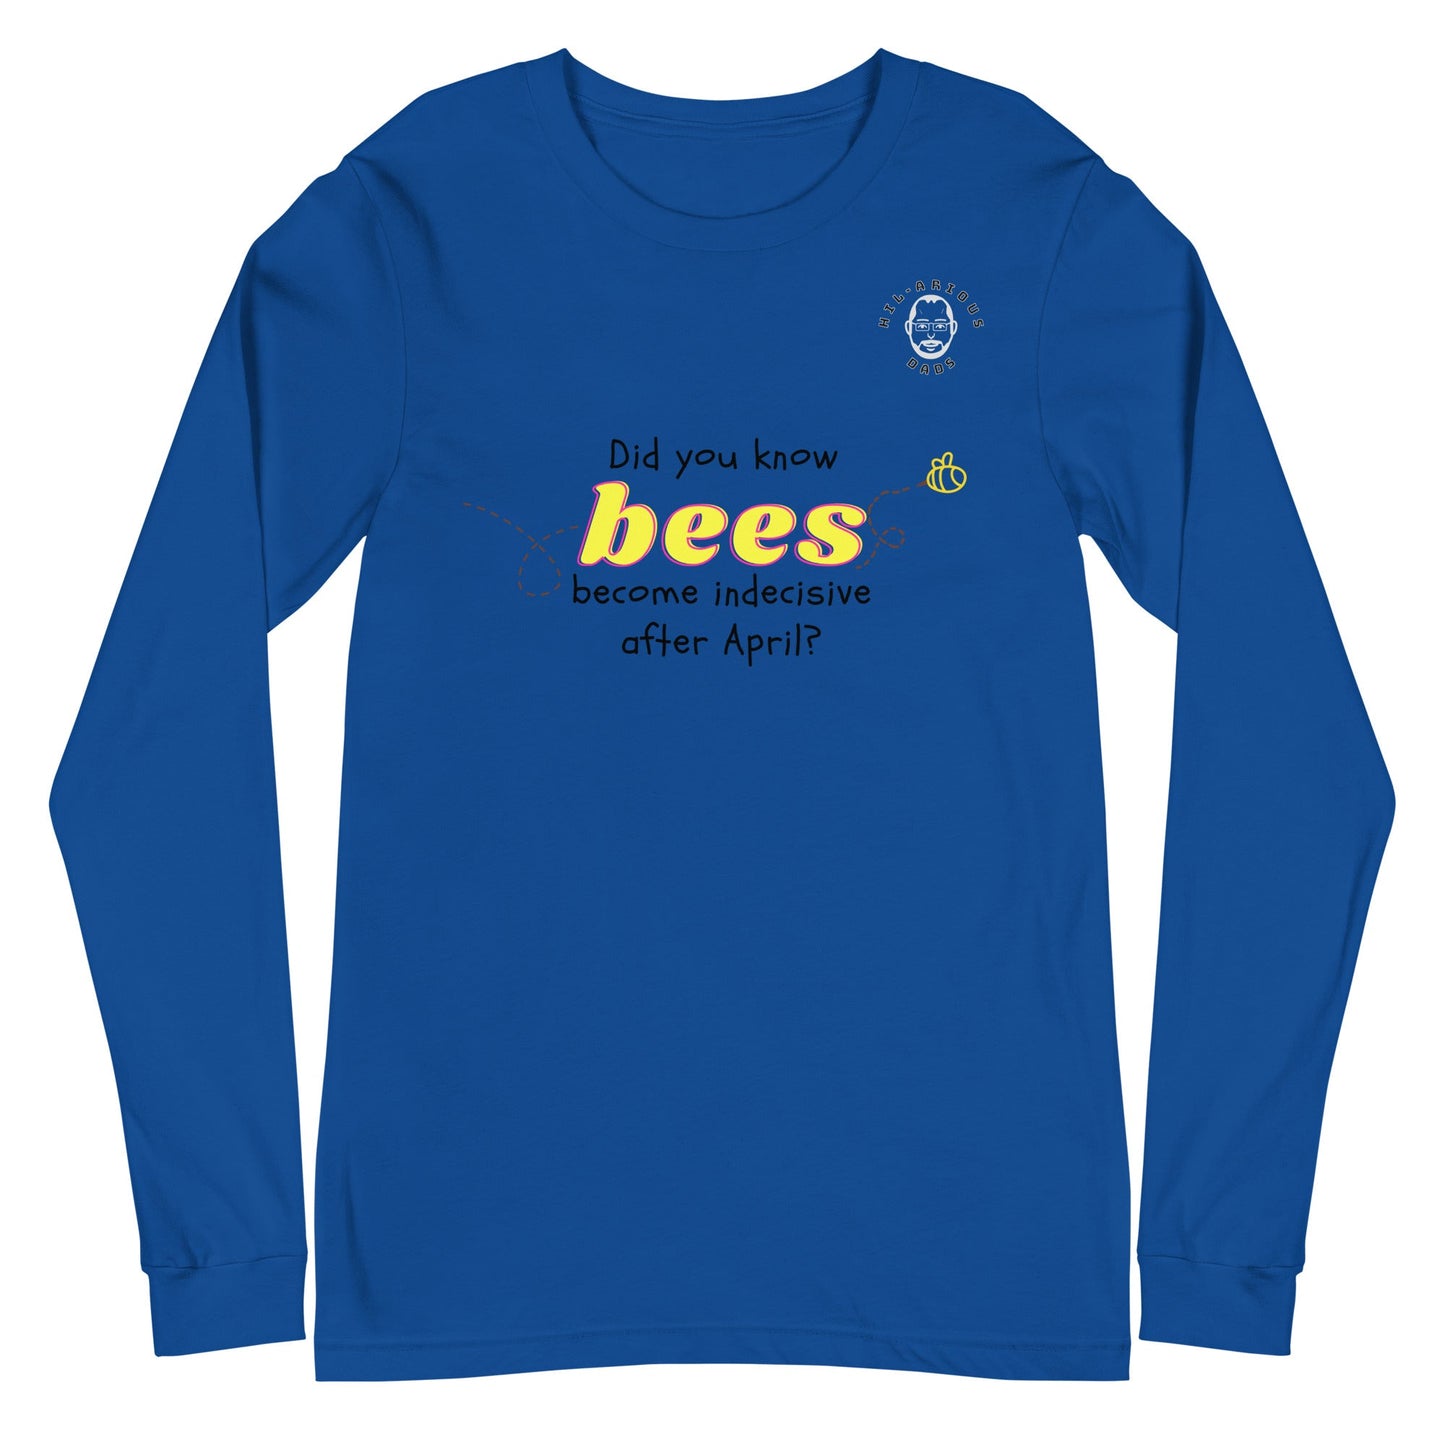 Did you know bees become indecisive after April?-Long Sleeve Tee - Hil-arious Dads